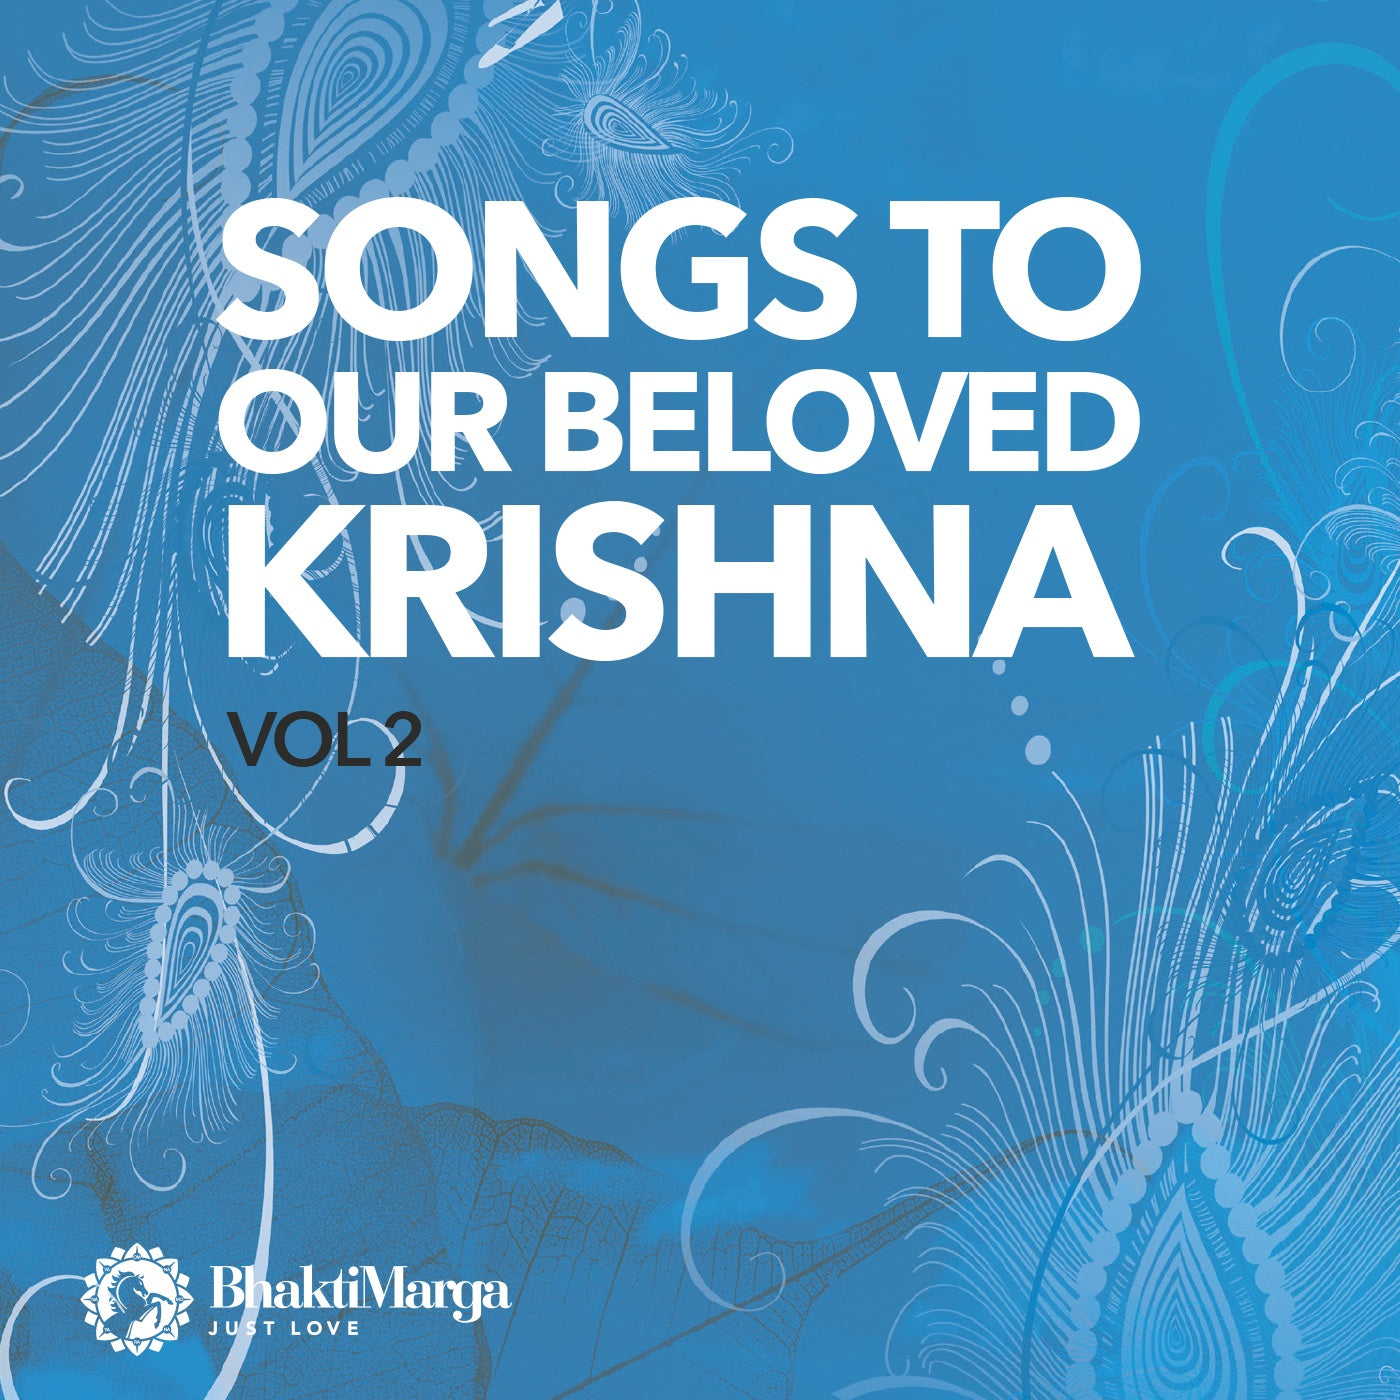 Song to Our Beloved Krishna vol.2